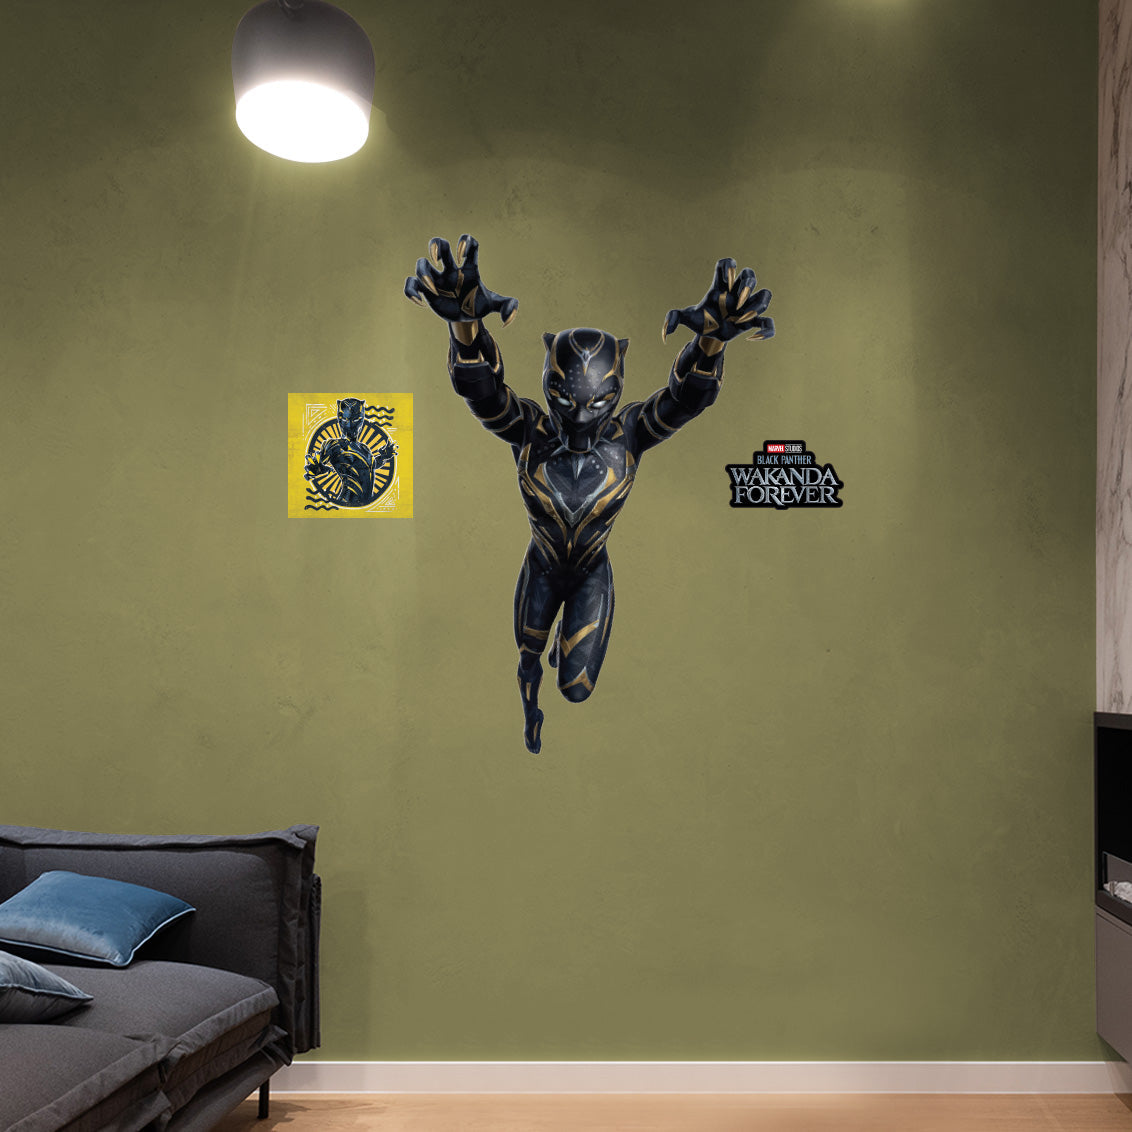 Black Panther Wakanda Forever: Black Panther Jumping RealBig - Officially Licensed Marvel Removable Adhesive Decal